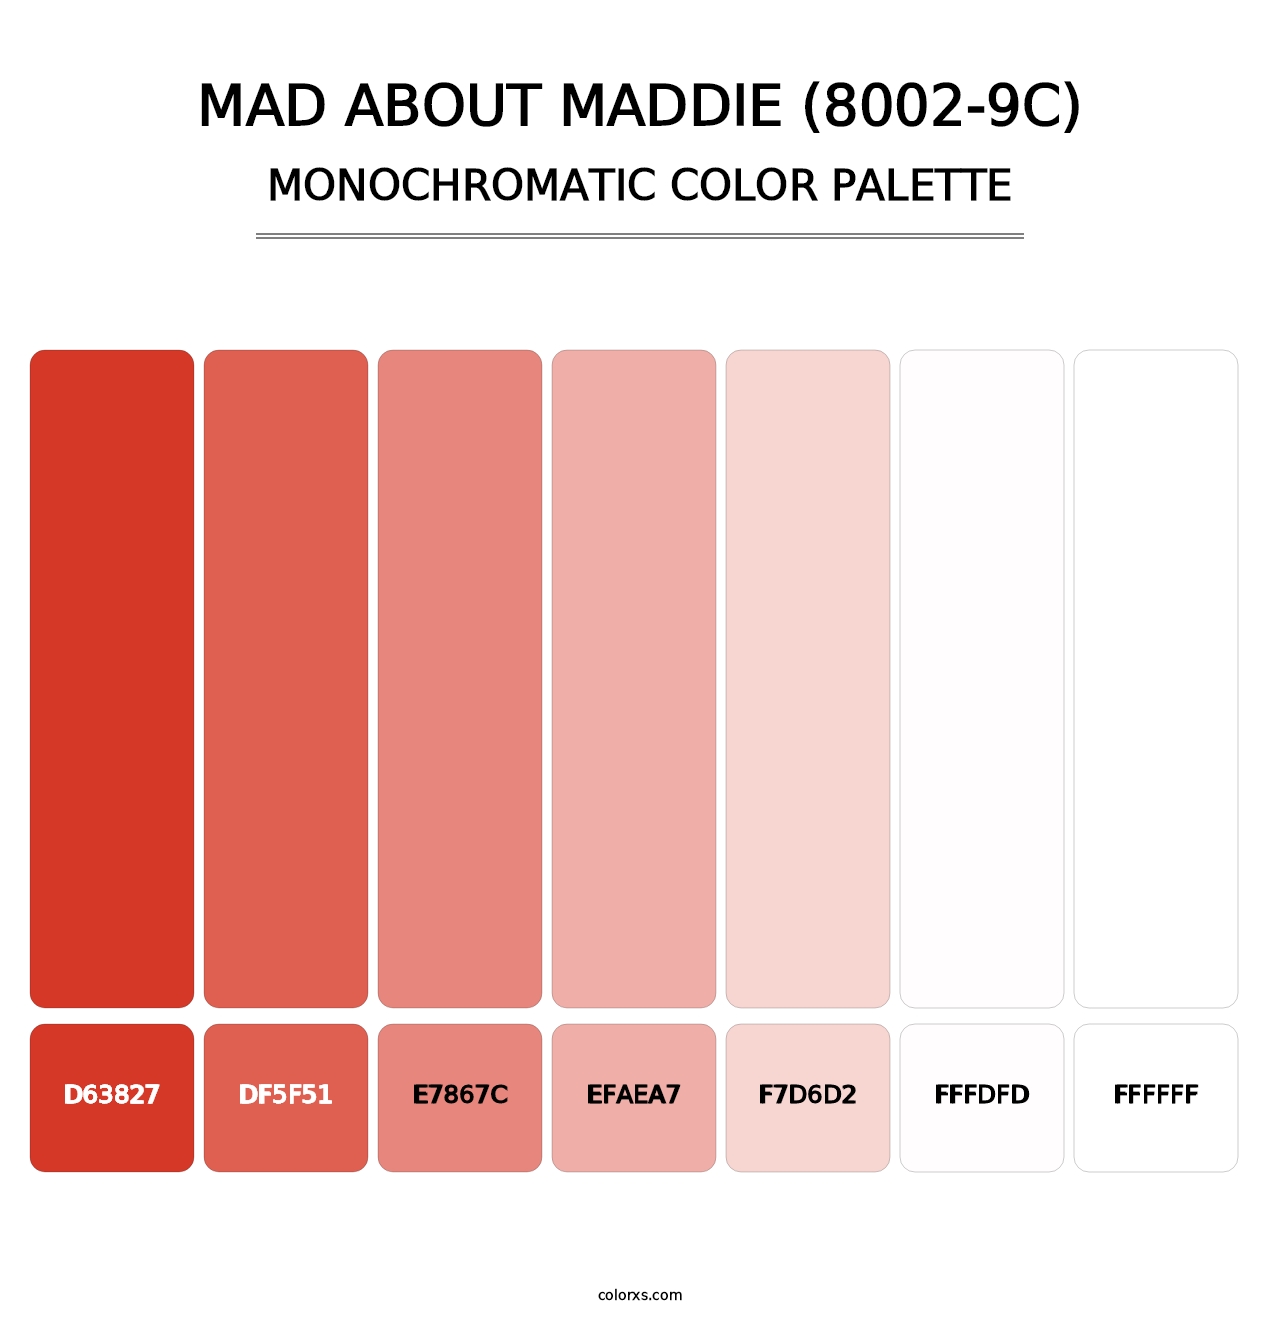 Mad About Maddie (8002-9C) - Monochromatic Color Palette